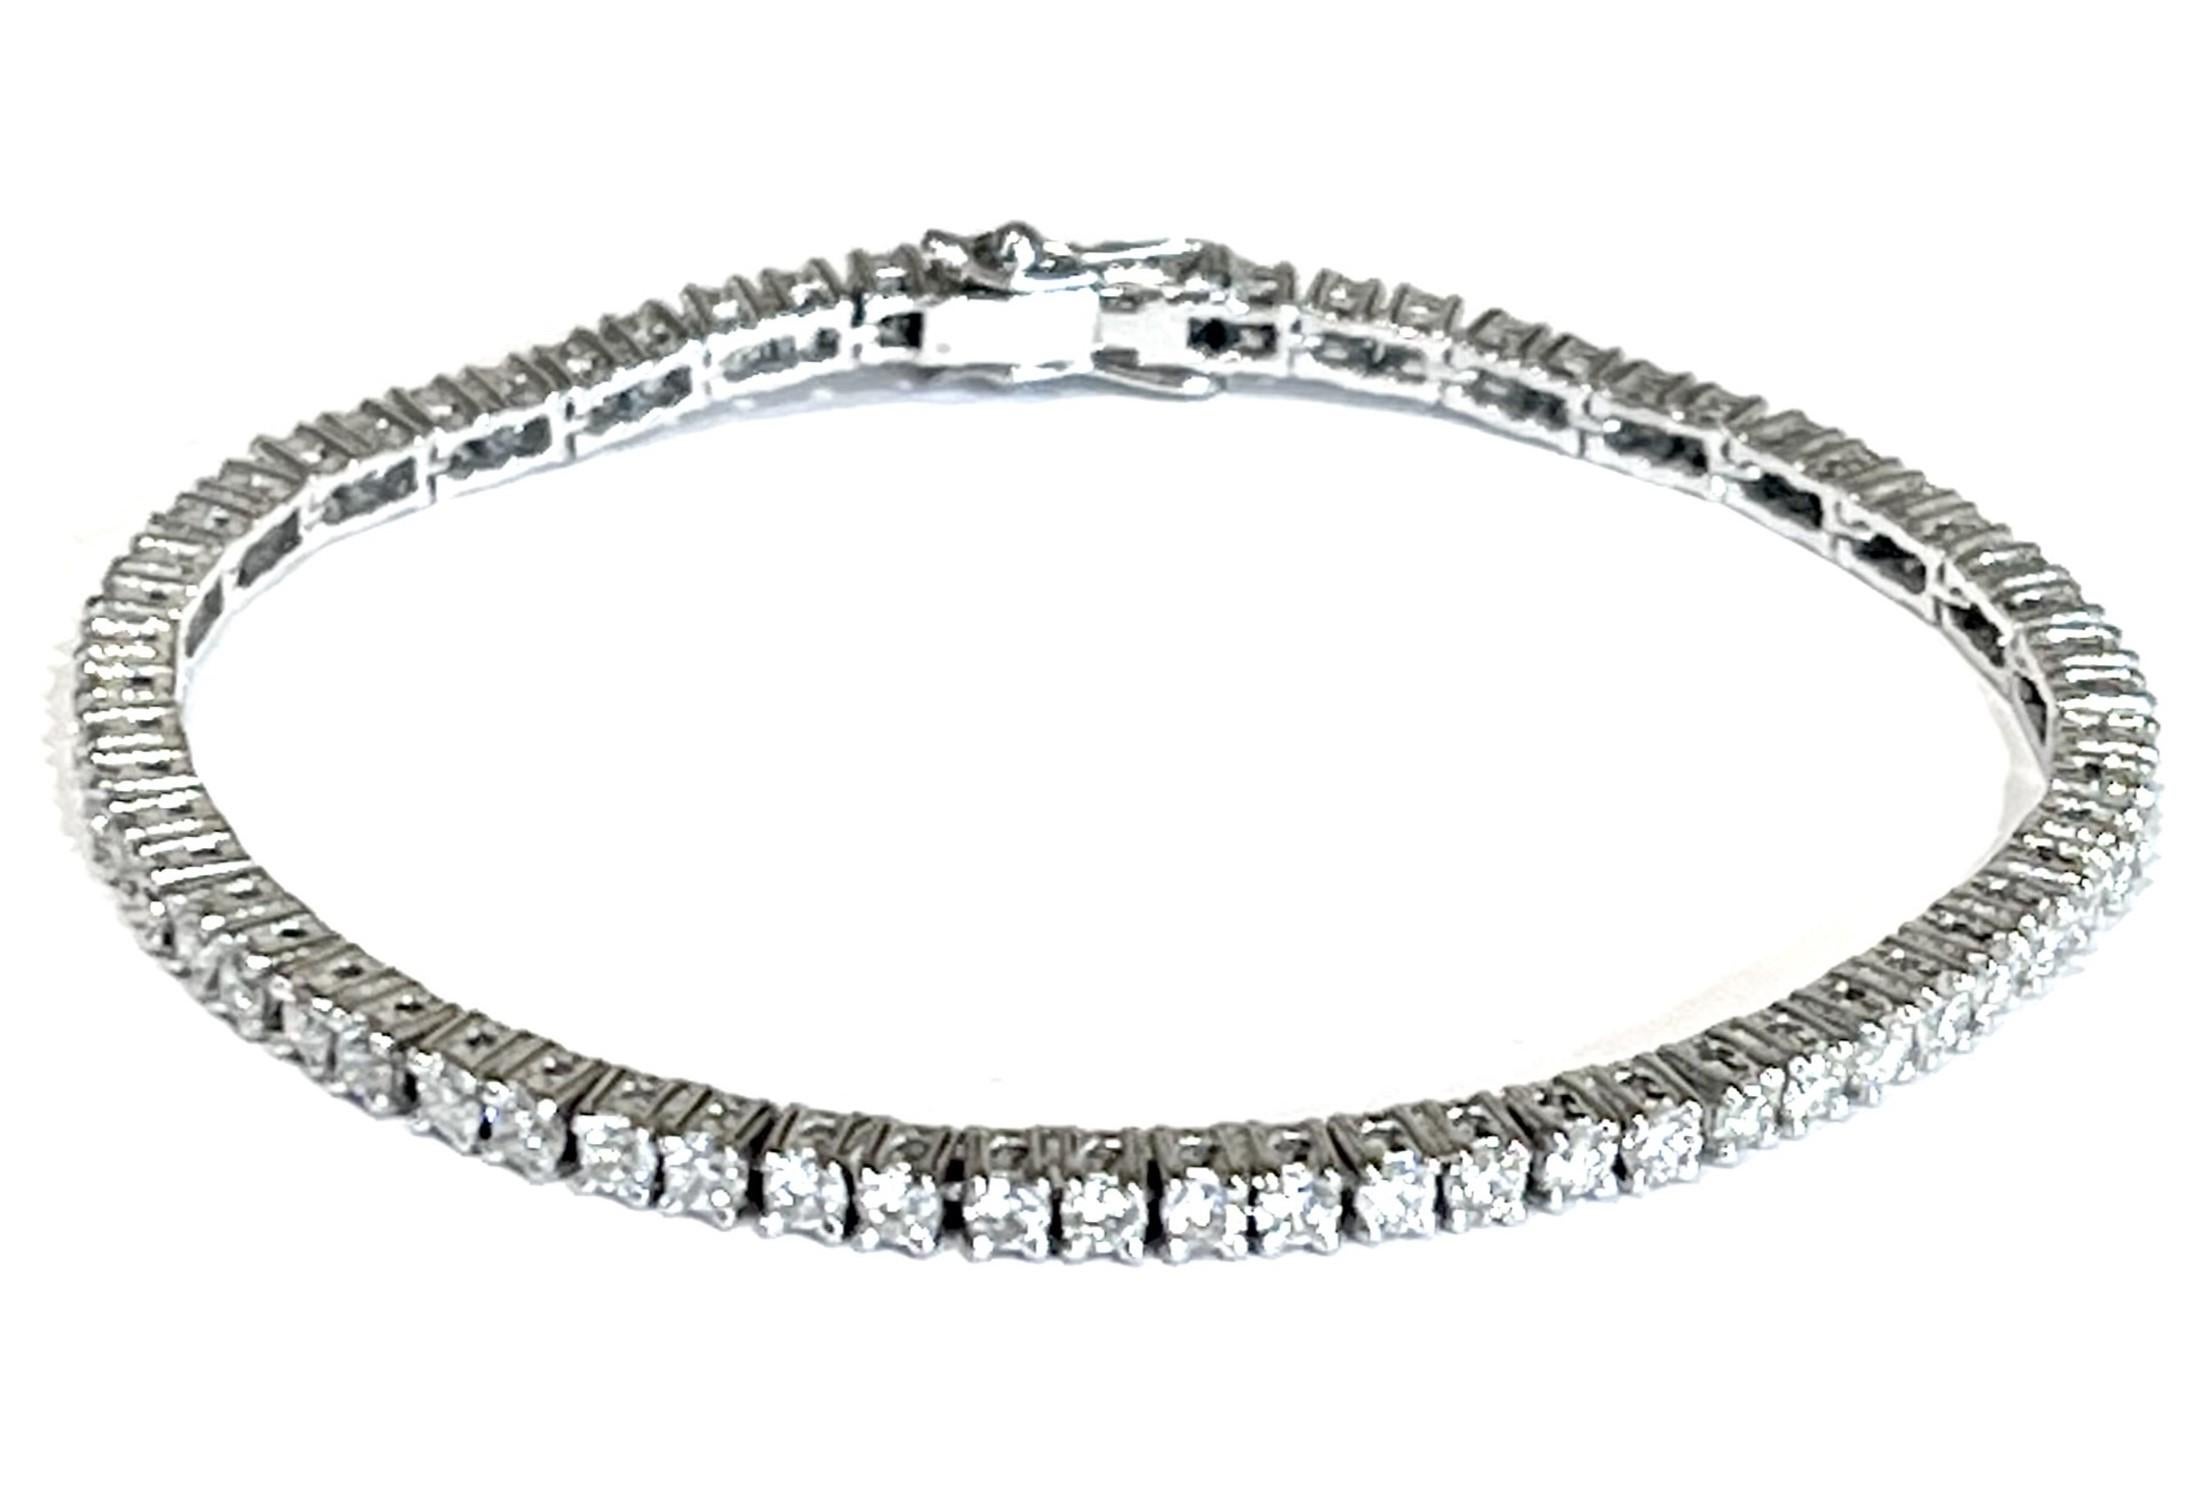 Tennis bracelets in white gold set with brilliant-cut natural diamonds.

Estimated total weight of diamonds: 3.25 carats

Dimensions : 3 x 3.55 mm (0.118 x 0.139 inch)

Length : 18 cm (7.08 inch)

Bracelet weight: 12.80 g

18 carat white gold,